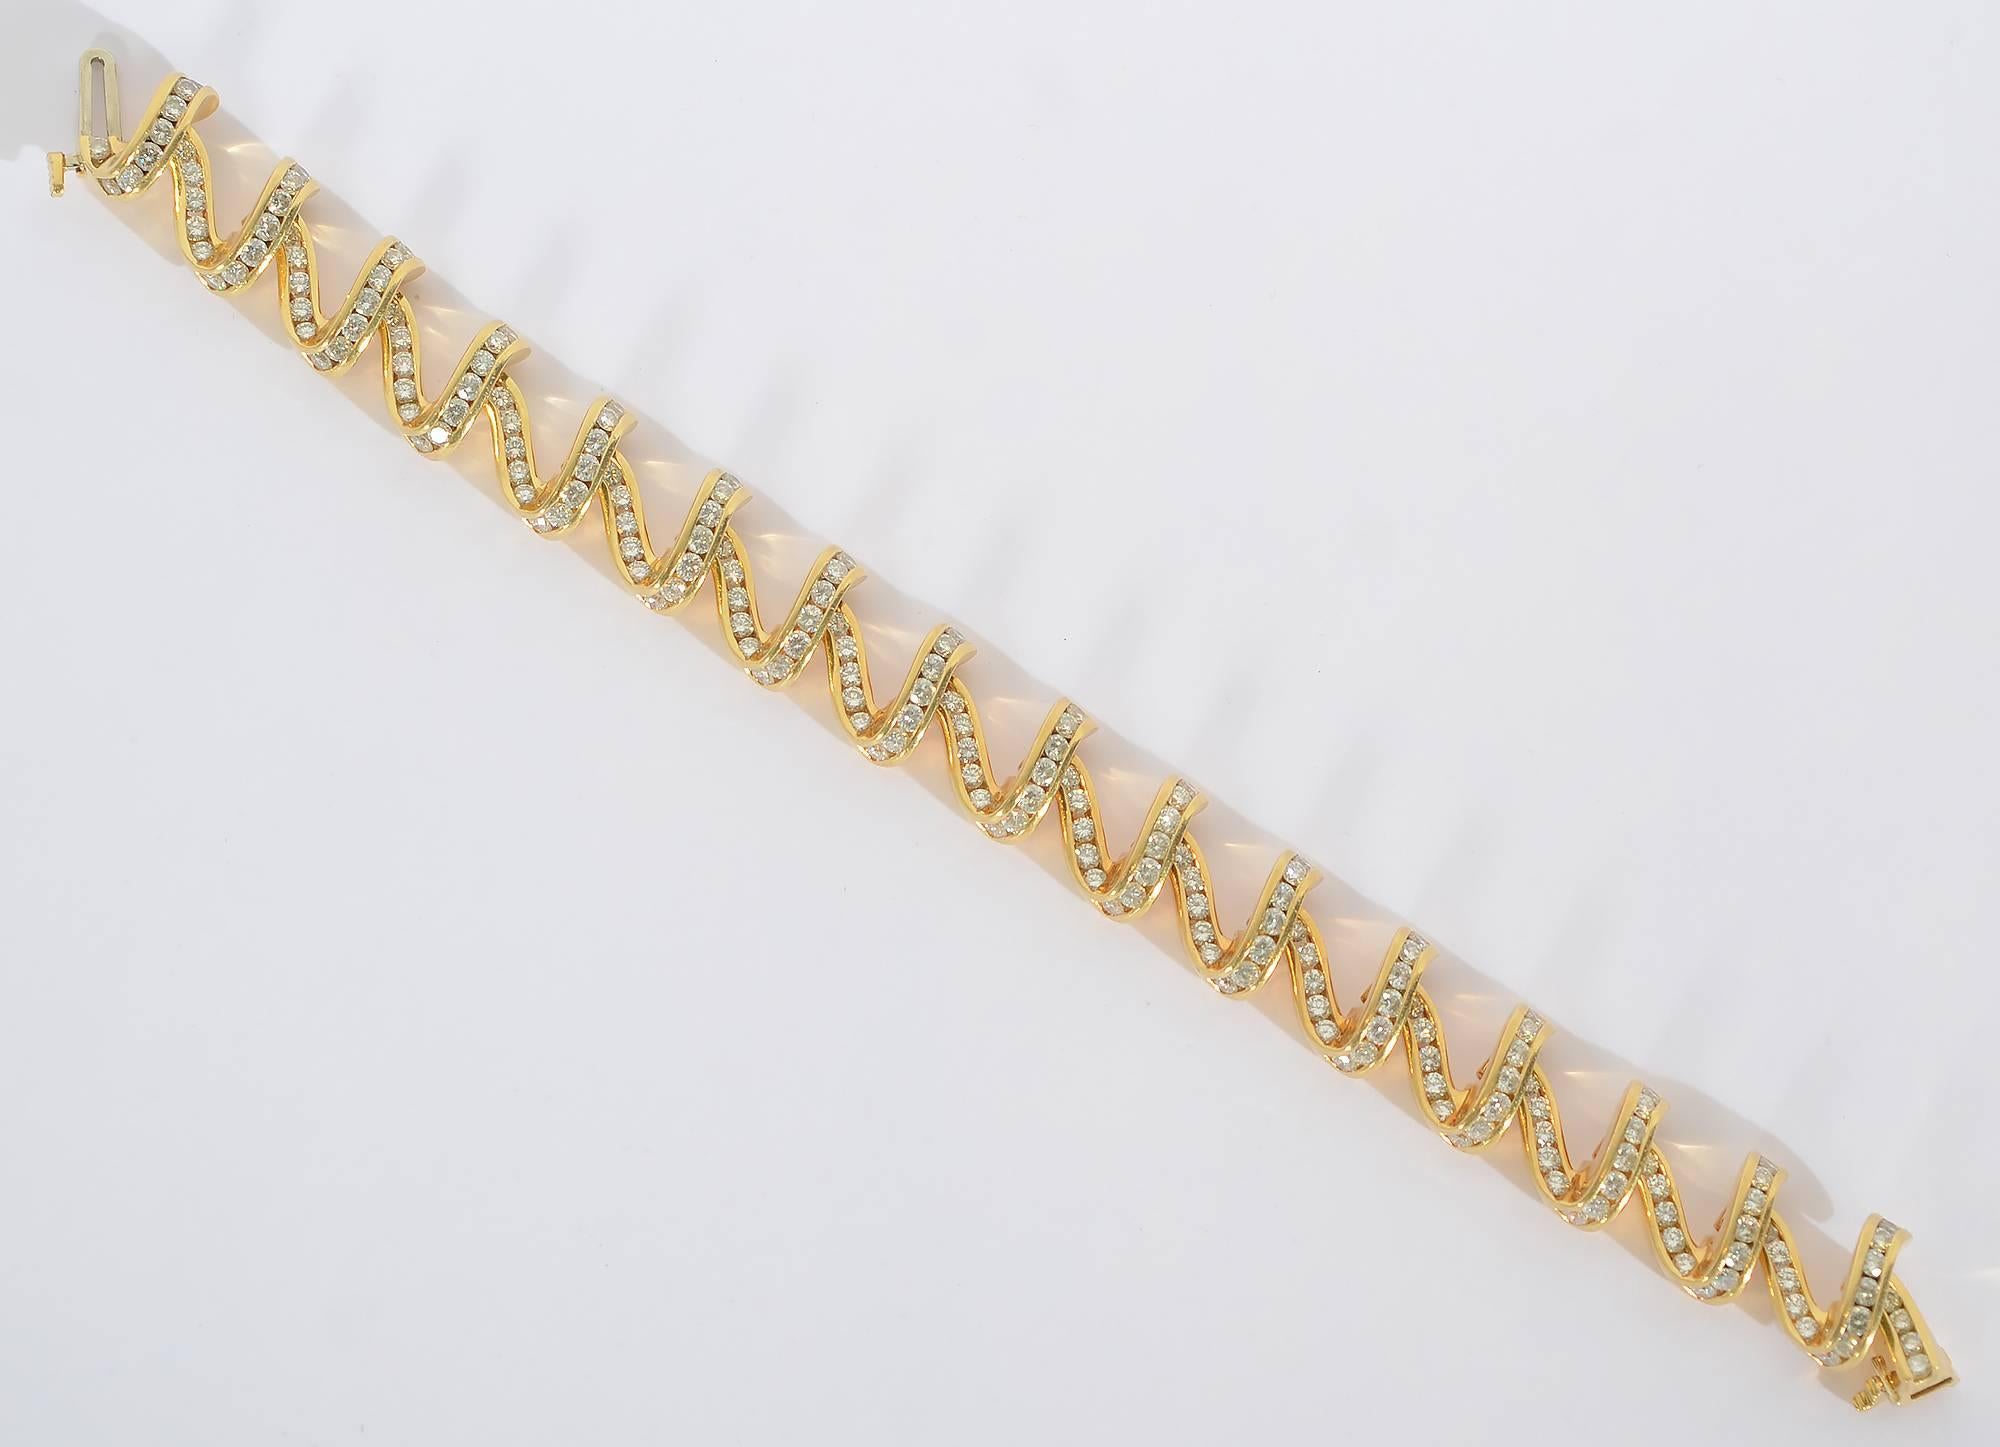 This exquisite bracelet by Charles Krypell looks like undulating ribbon. It has wonderful grace and dimensionality.The links are filled with 9 carats of round-faceted diamonds. The bracelet measures 7 inches long and 1/2 an inch wide. It has a